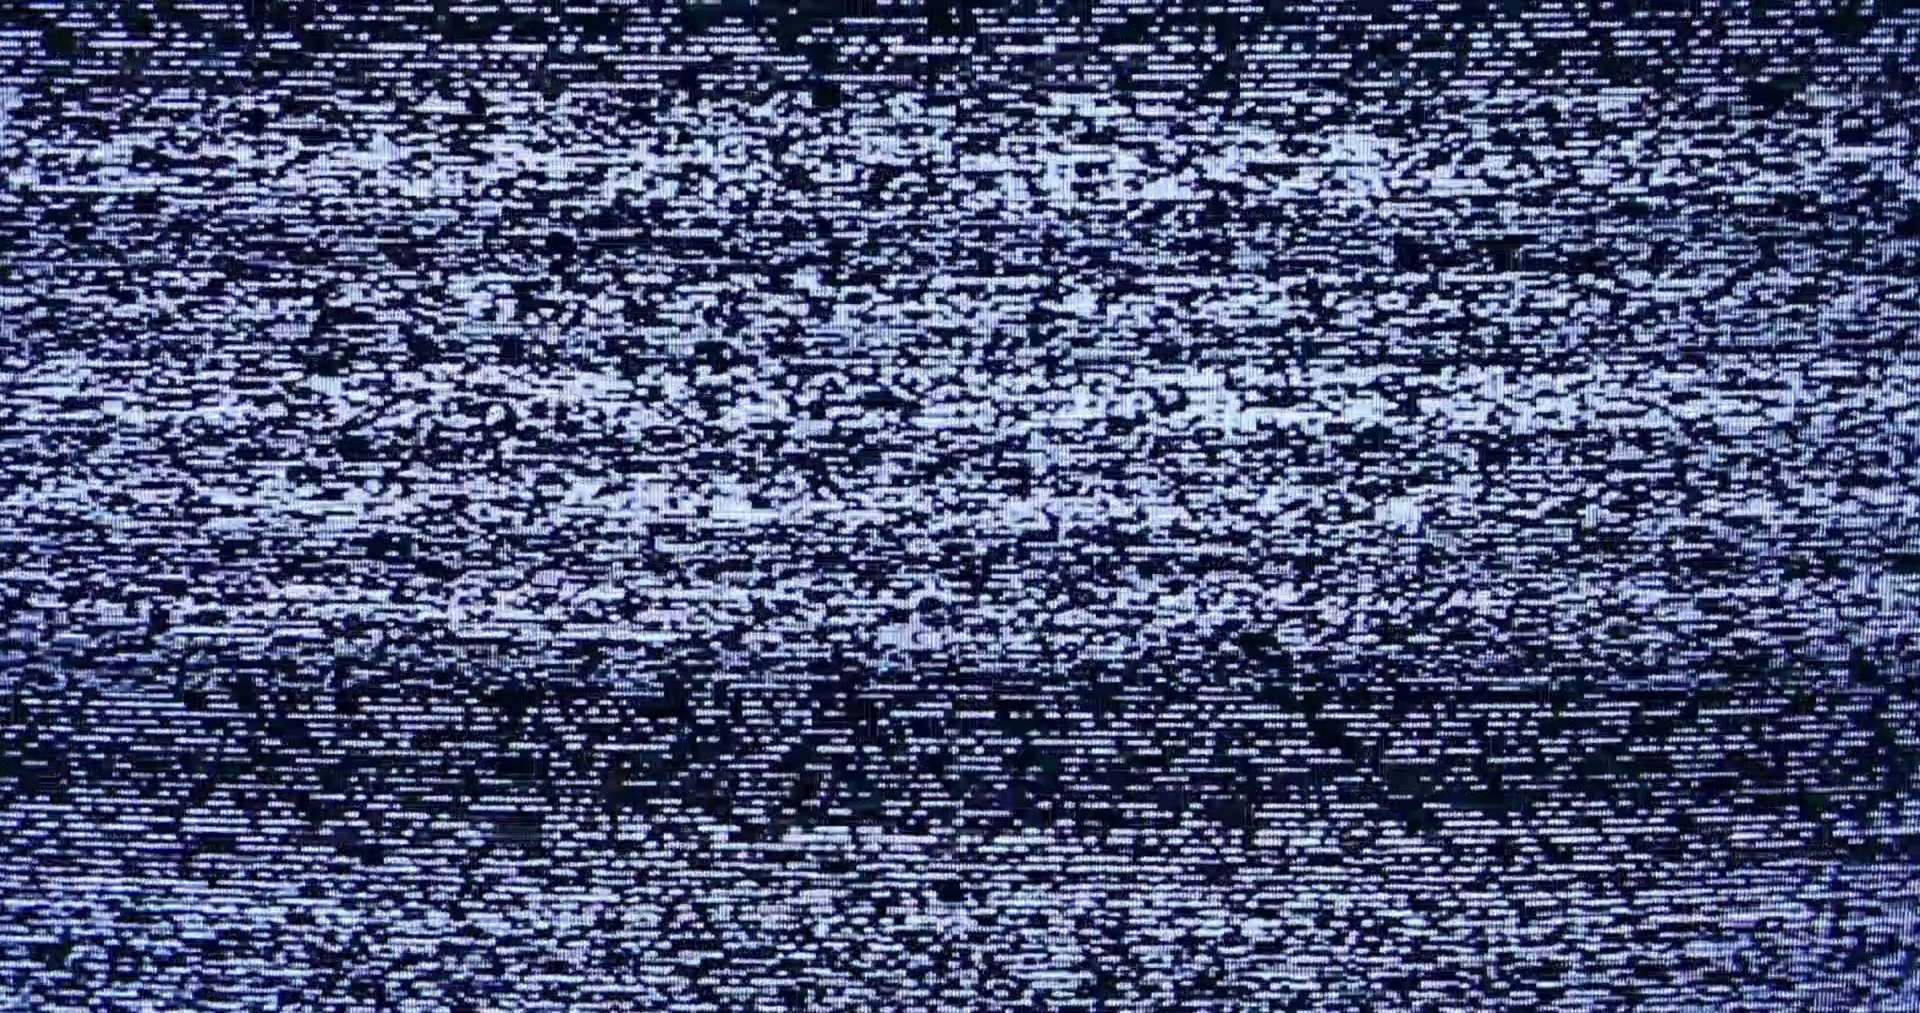 4k Tv Static Noise Stock Video Footage.